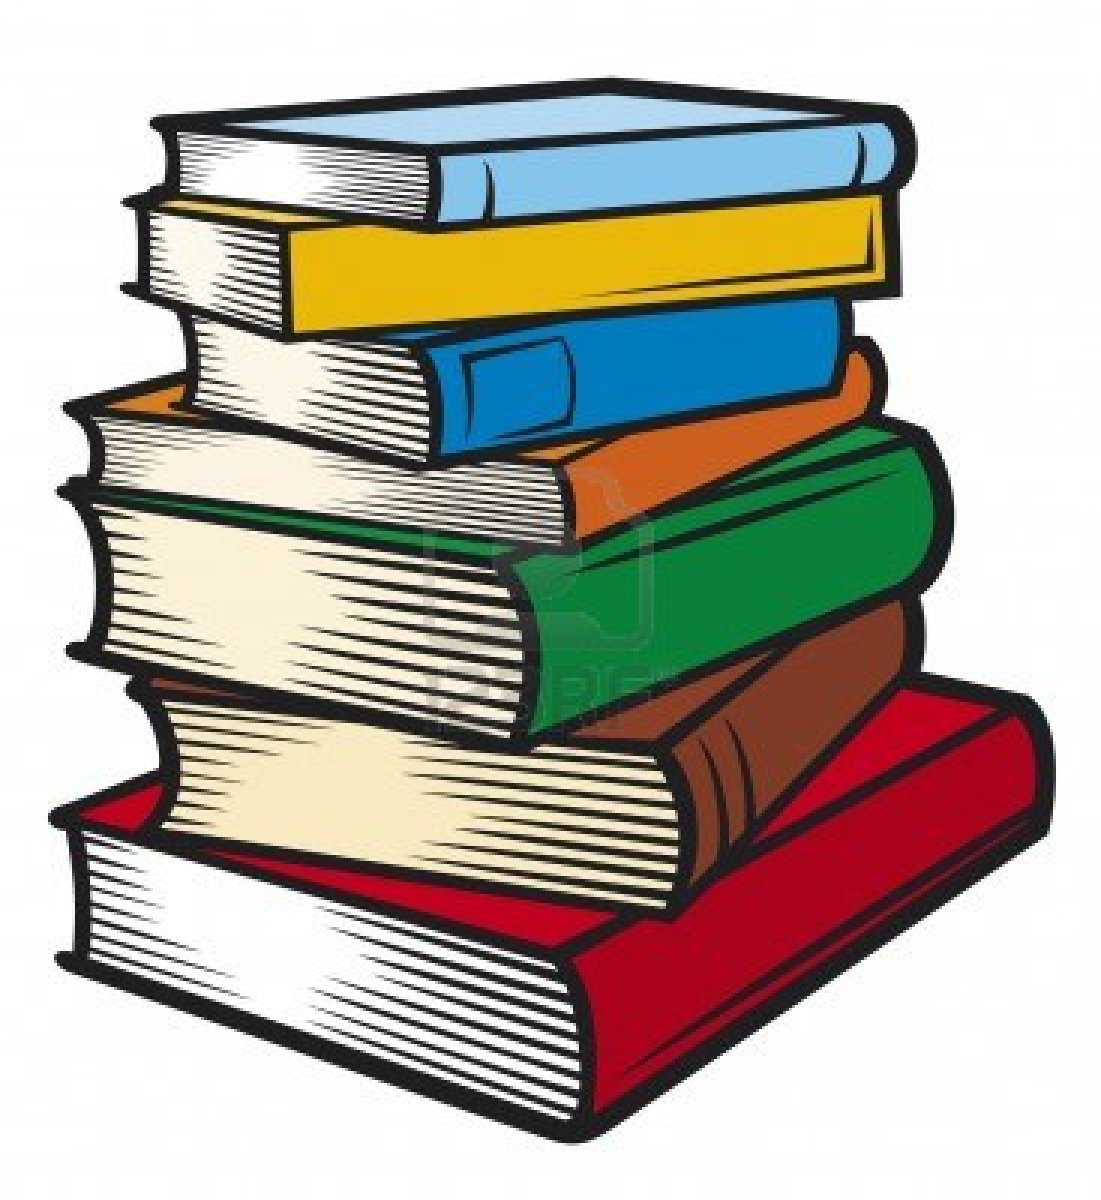 3,300+ Clip Art Of A Piles Of Books Stock Illustrations, Royalty